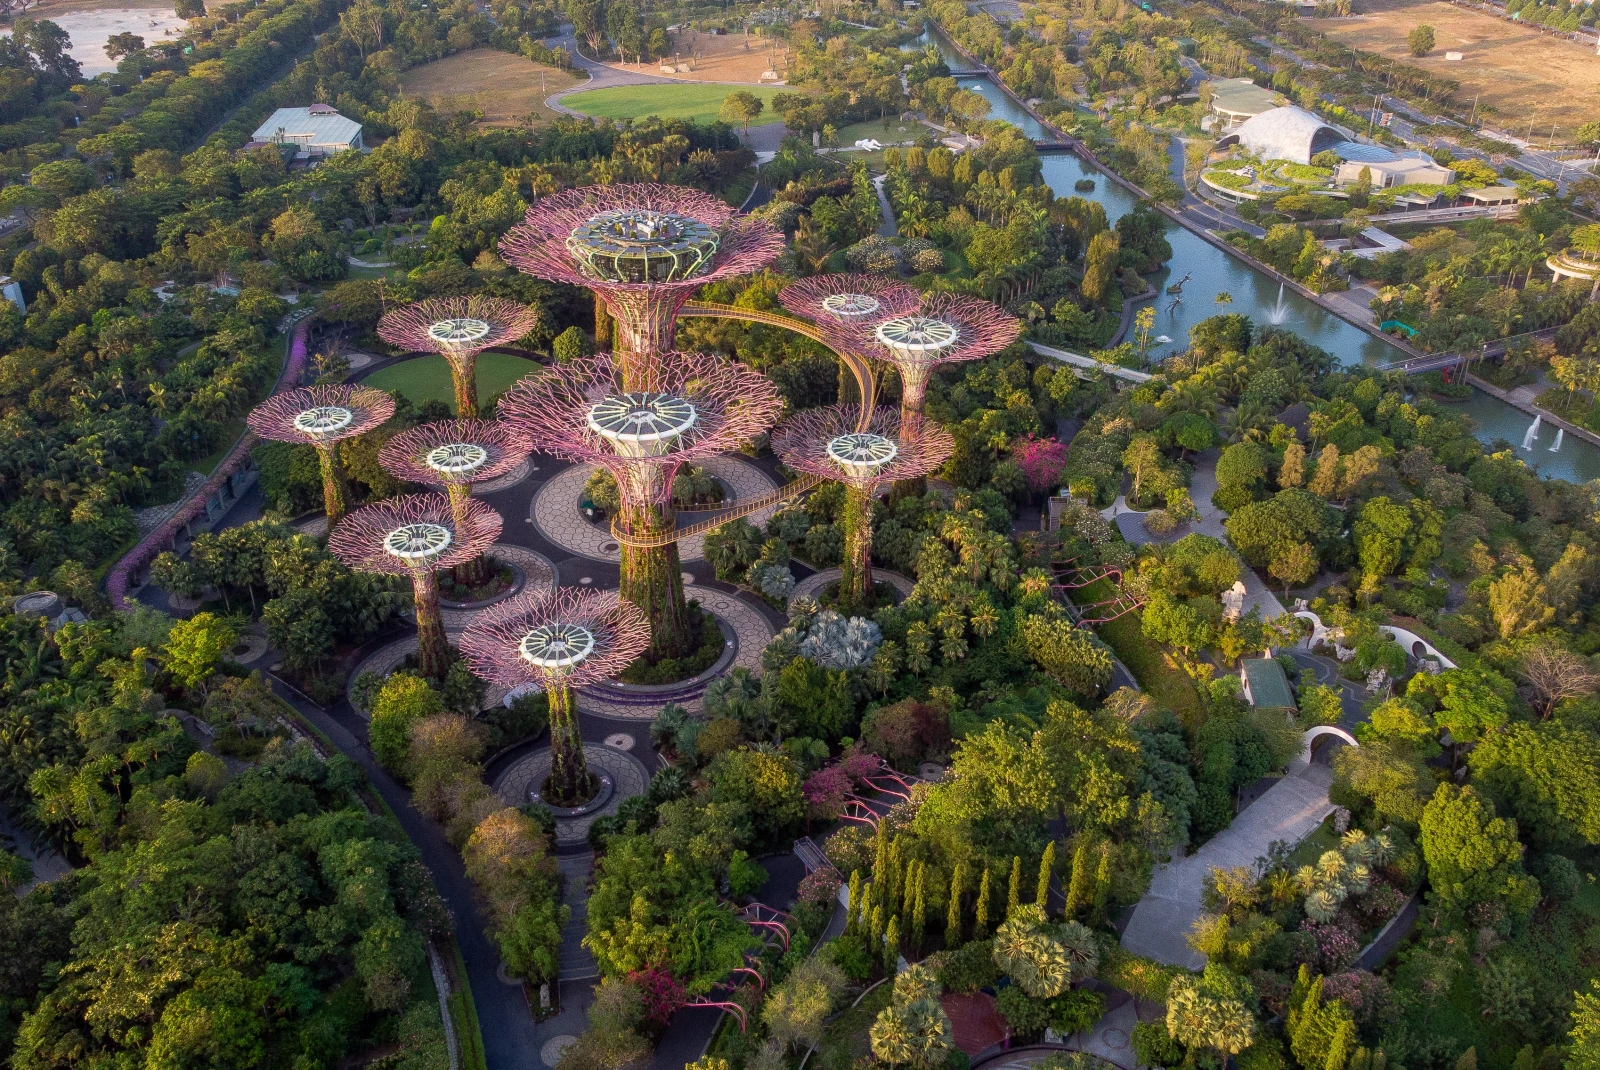 Aerial view of trees and sculptures during daytime